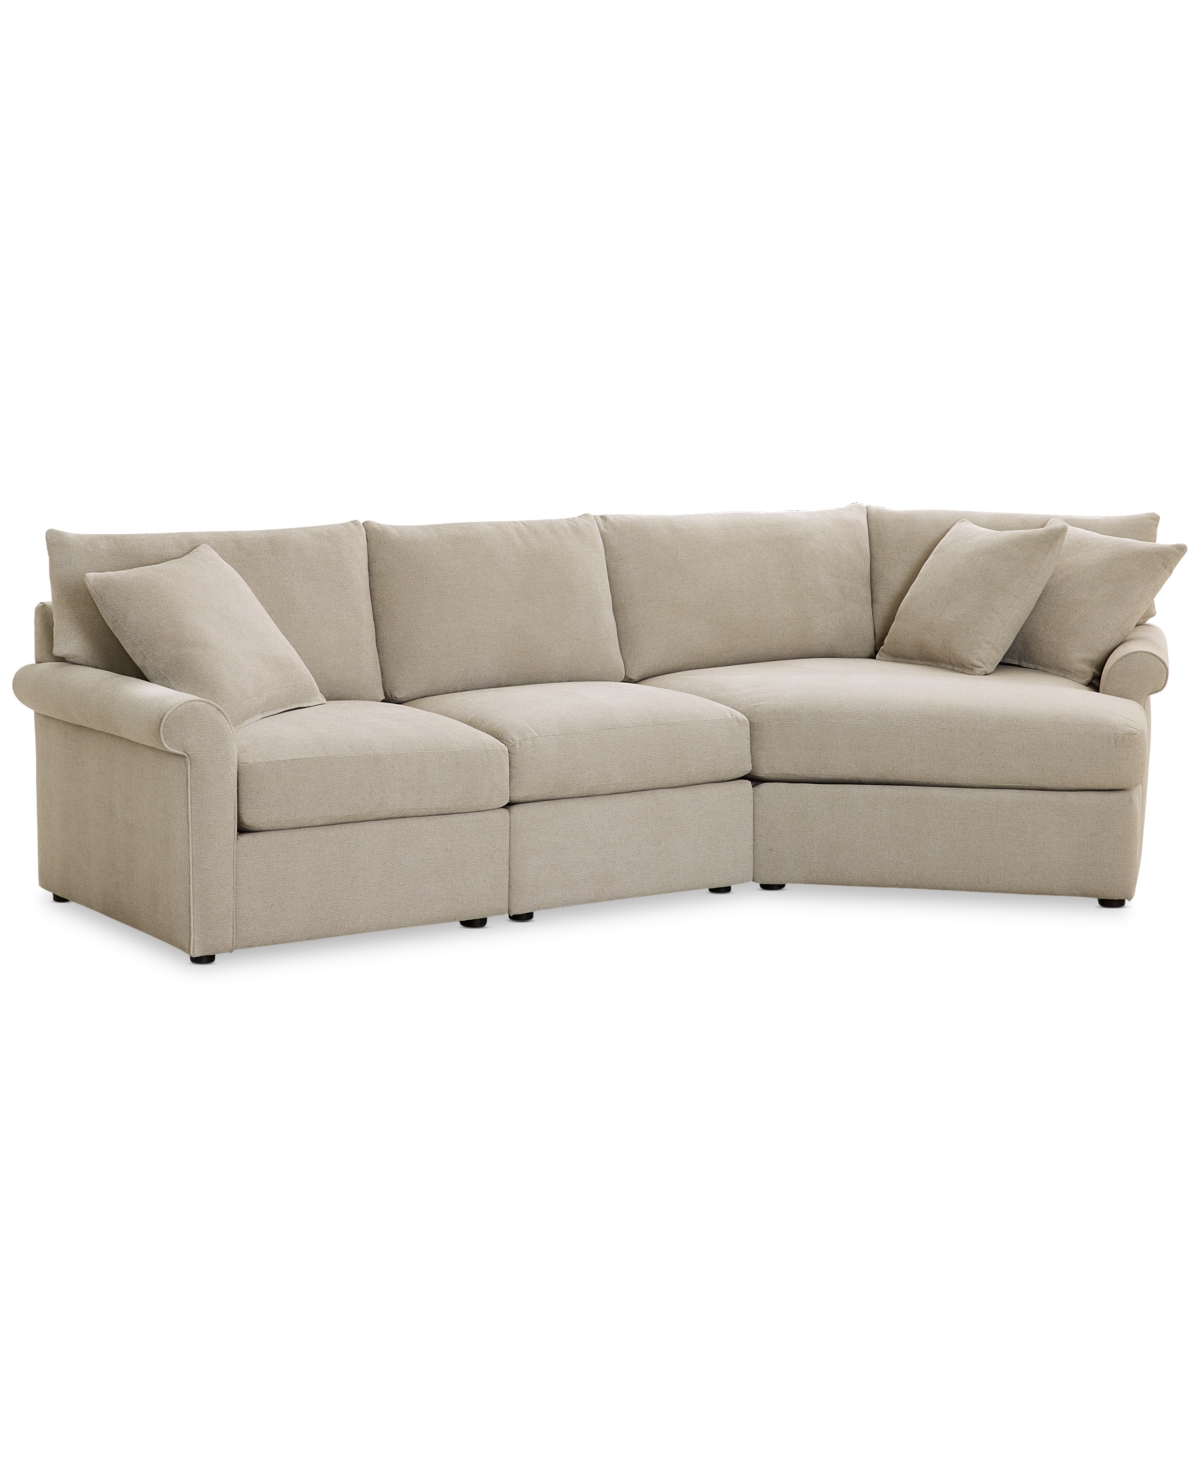 Furniture Wrenley 131" 3-pc. Fabric Modular Cuddler Chaise Sectional Sofa, Created For Macy's In Dove